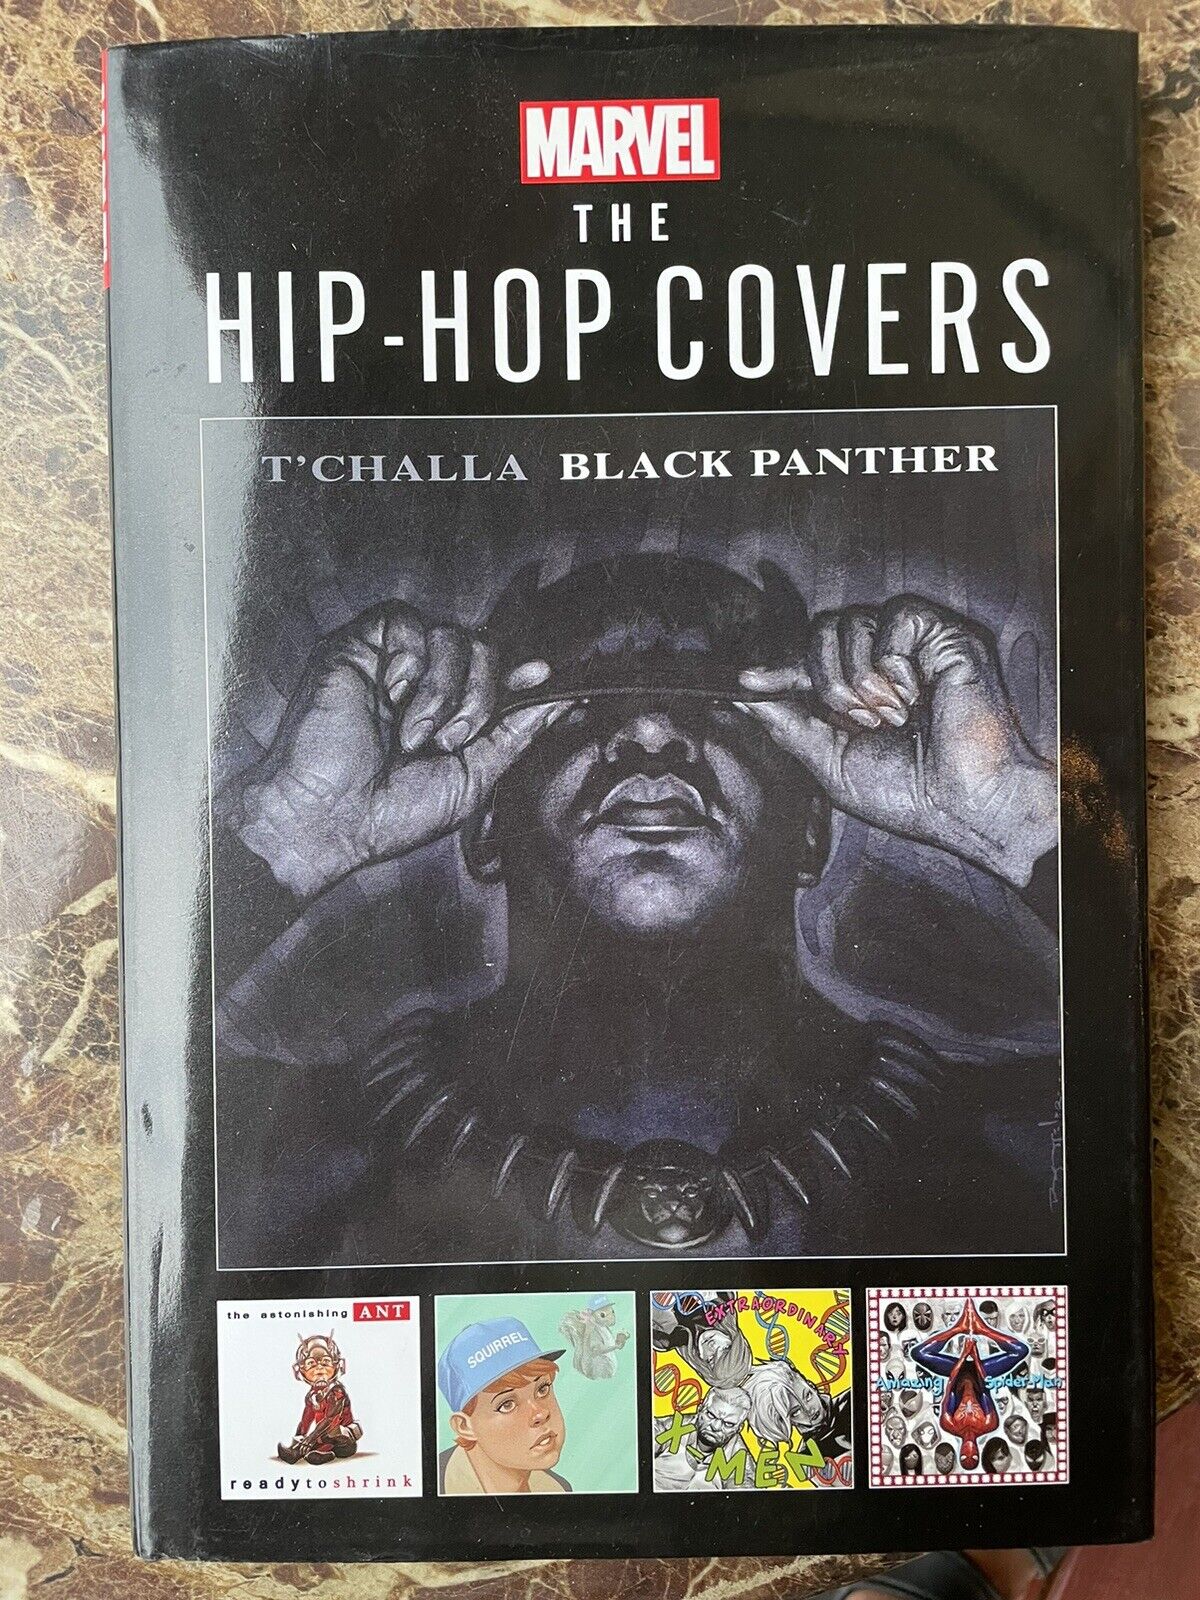 Marvel The Hip-Hop Covers #1 Hardcover - T\'Challa Black Panther - New